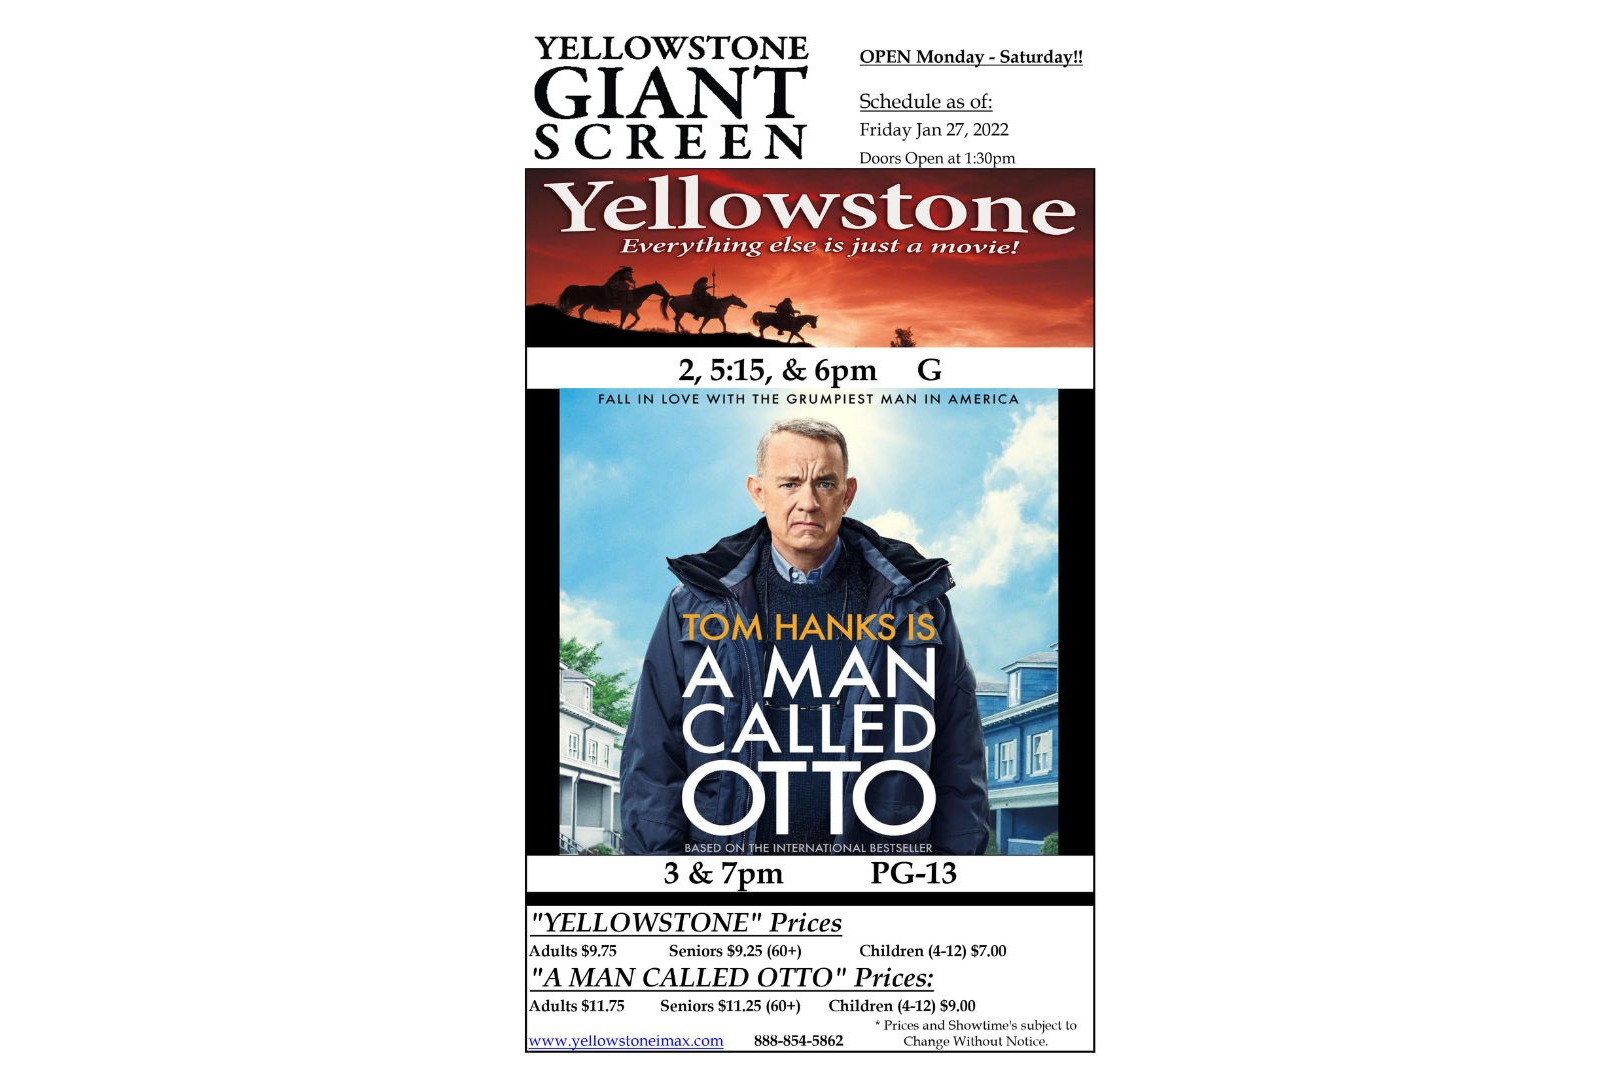 OPEN Monday - Saturday!! Schedule as of: SCREEN Friday Jan 13, 2022 Doors Open at 1:30pm "YELLOWSTONE" Prices Adults $9.75 Seniors $9.25 (60+) "A MAN CALLED OTTO" Prices: Adults $11.75 Seniors $11.25 (60+) Children (4-12) $9.00 * Prices and Showtime's subject to www.vellowstoneimax.com 888-854-5862 Change Without Notice